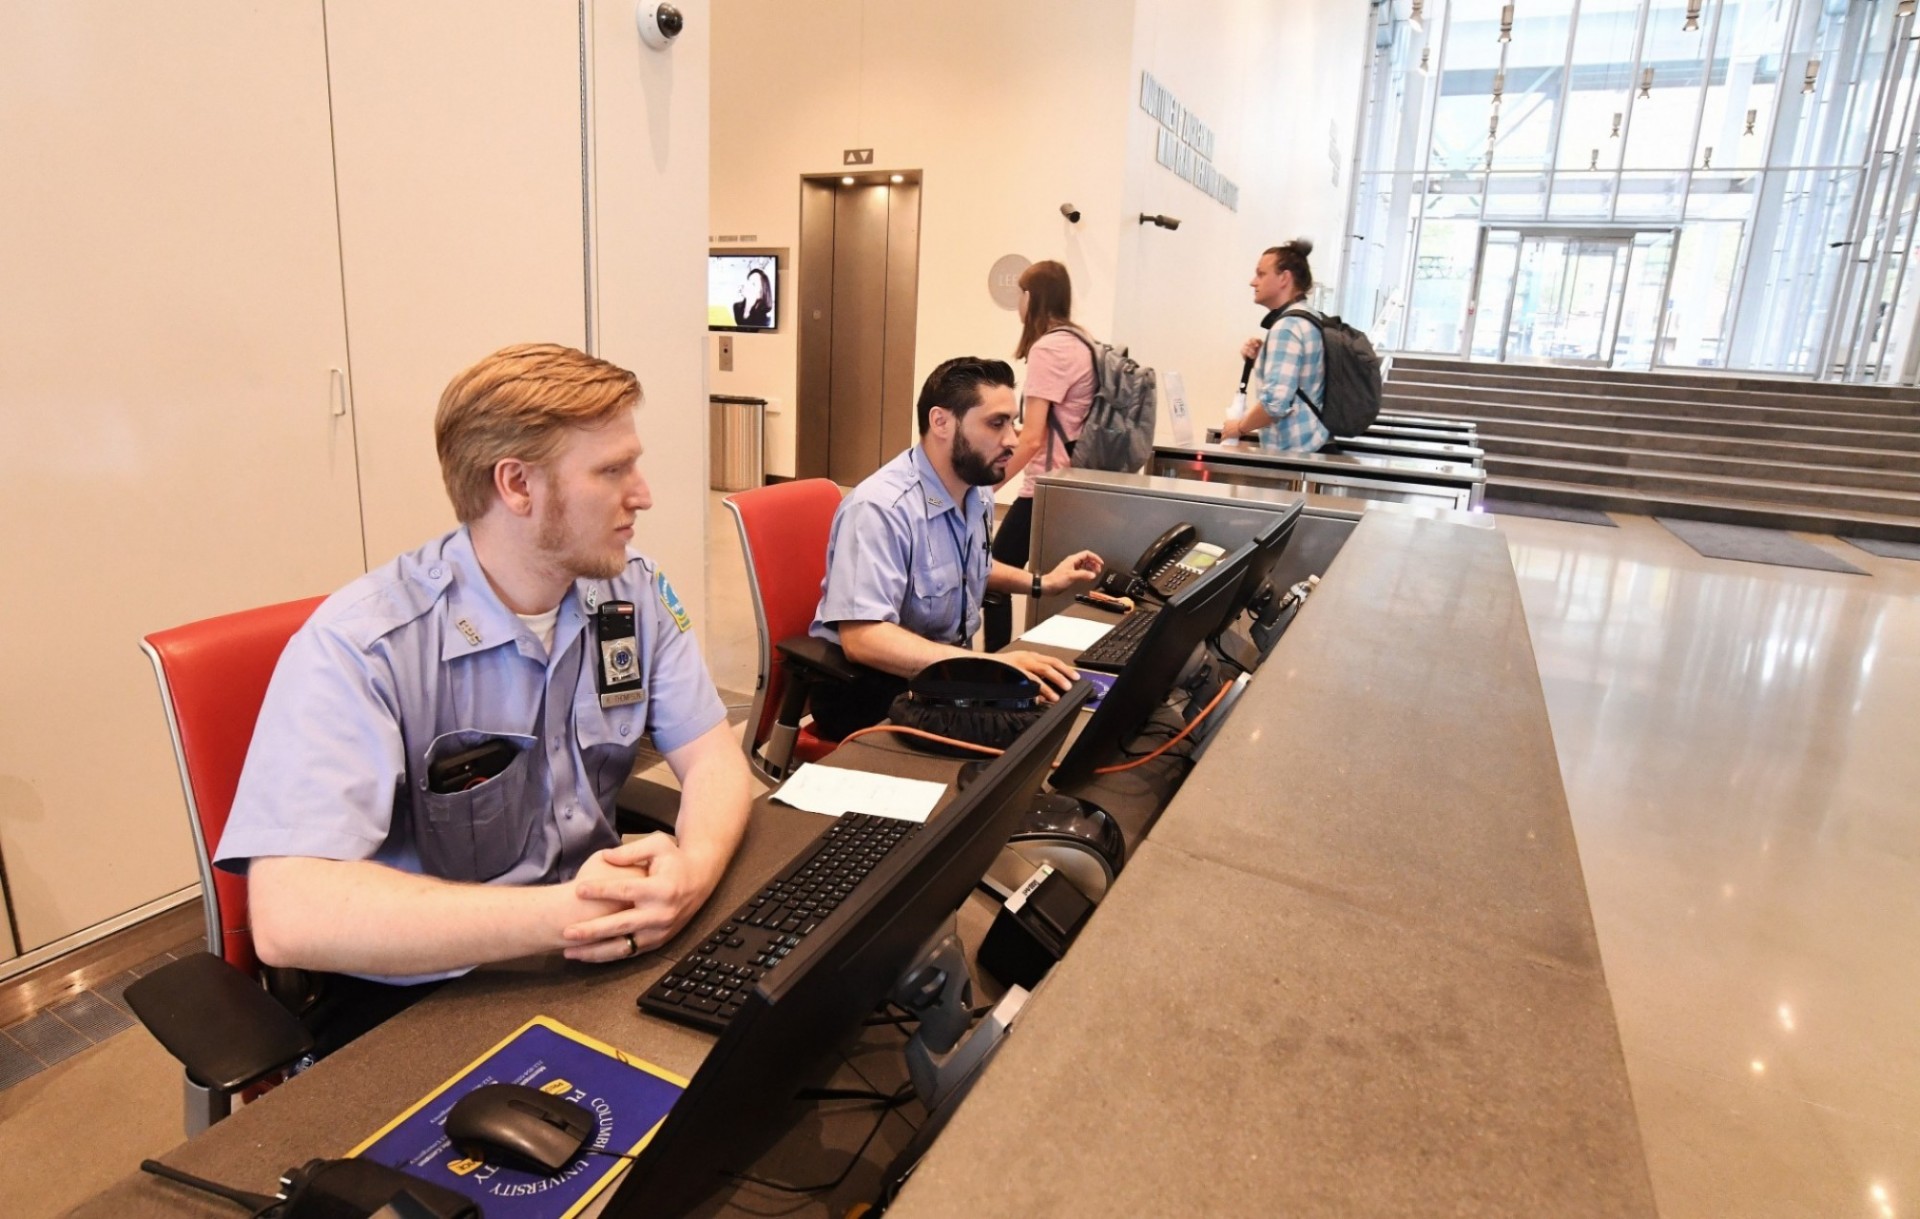 Two officers at the security desk at the Jerome L. Greene Science Center with two people in the background behind the desk entering the turnstiles.